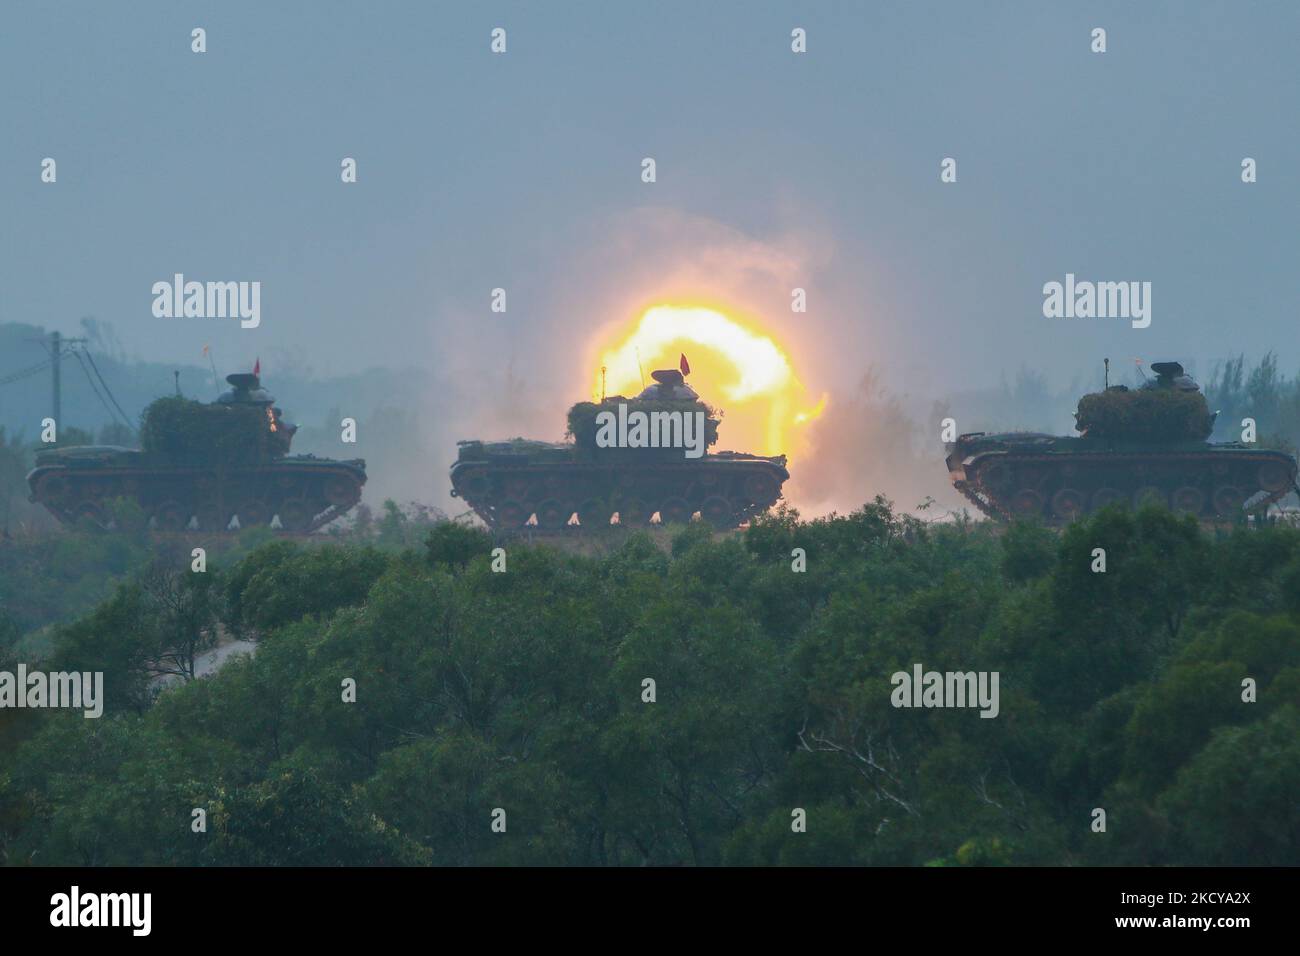 M60-A3 tanks fire cannons during a live ammunition military drill at an unnamed location, amid rising tensions with China, in Hsinchu, Taiwan, 21 December 2021. Taiwan has been facing intensifying military threats from China including Chinese PLA warplanes sent to cruise around the island, while the US has been offering more arm sales to Taiwan. (Photo by Ceng Shou Yi/NurPhoto) Stock Photo